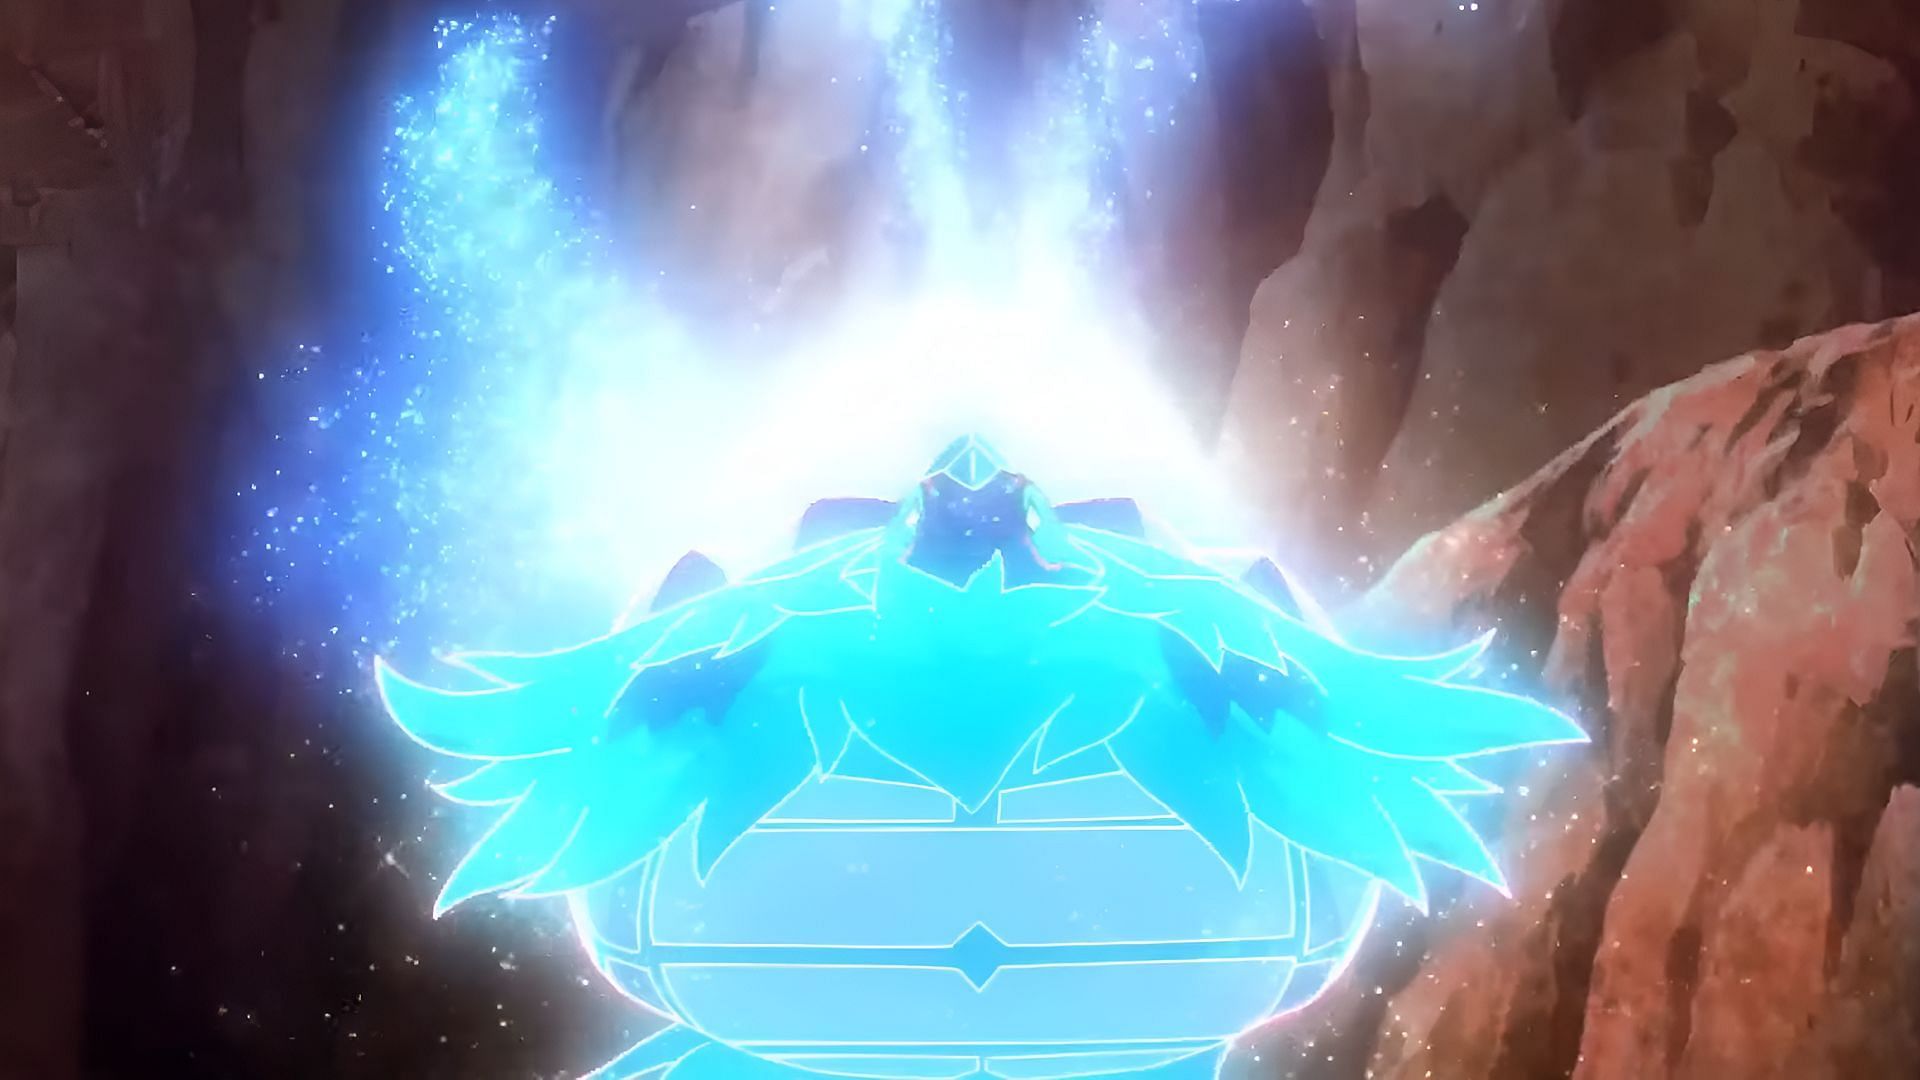 Terapagos transforms to protect its friends in Pokemon Horizons Episode 33 (Image via The Pokemon Company)